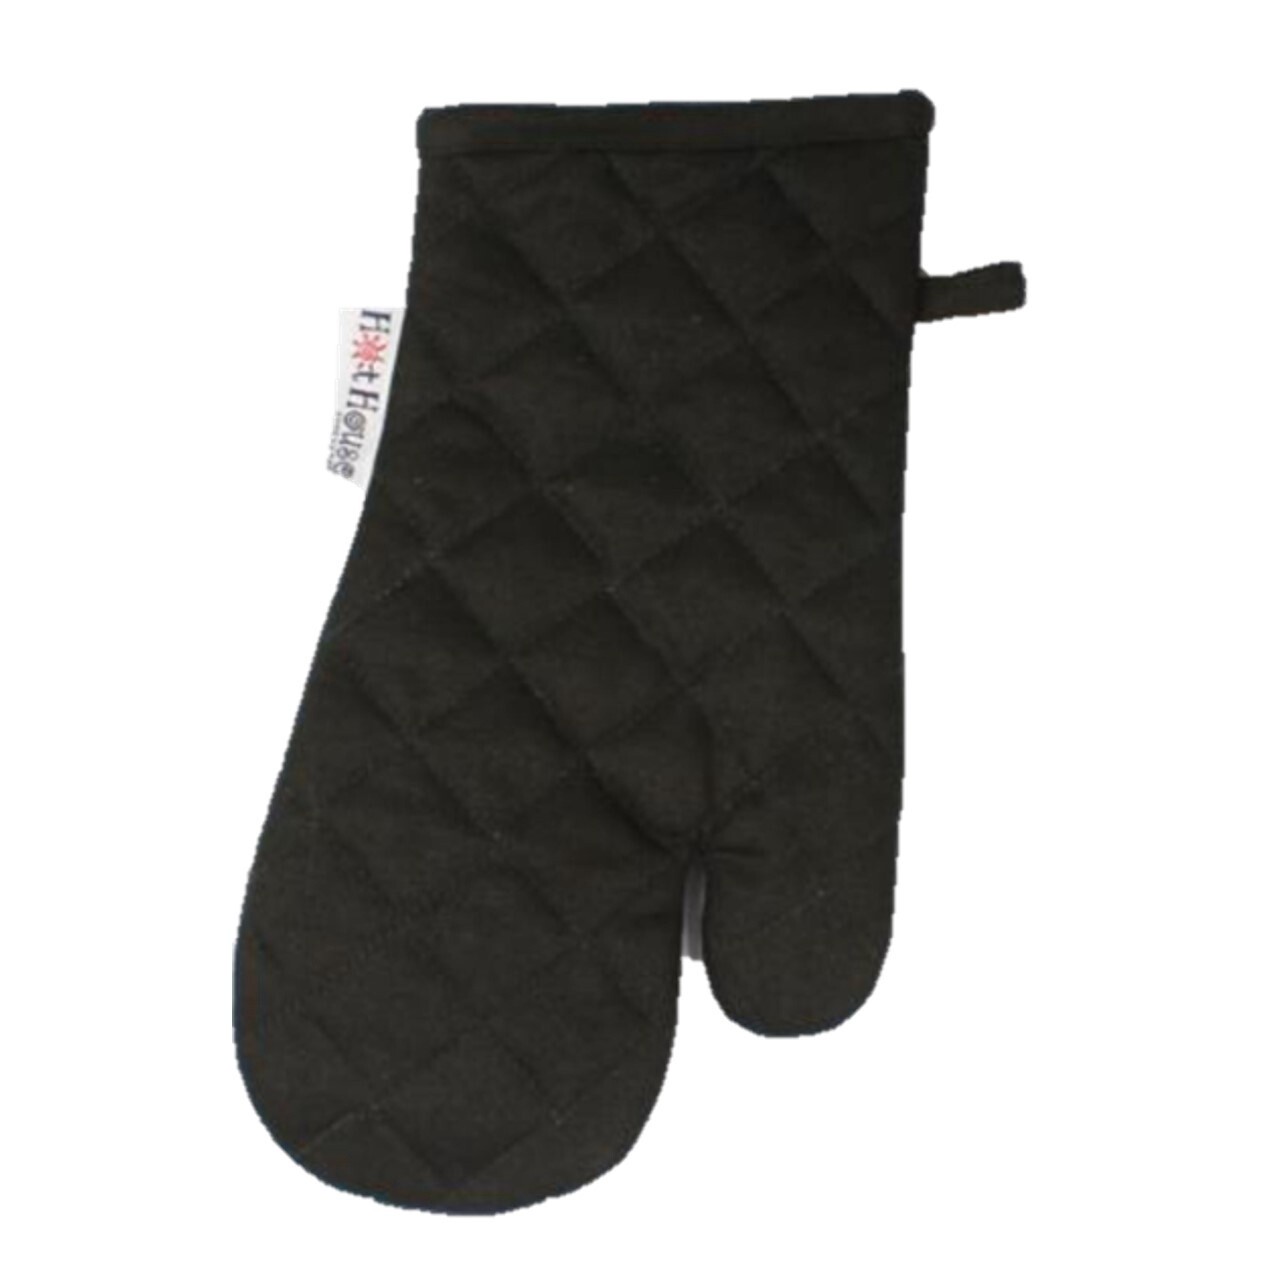 Hot House Oven Glove Solid Black